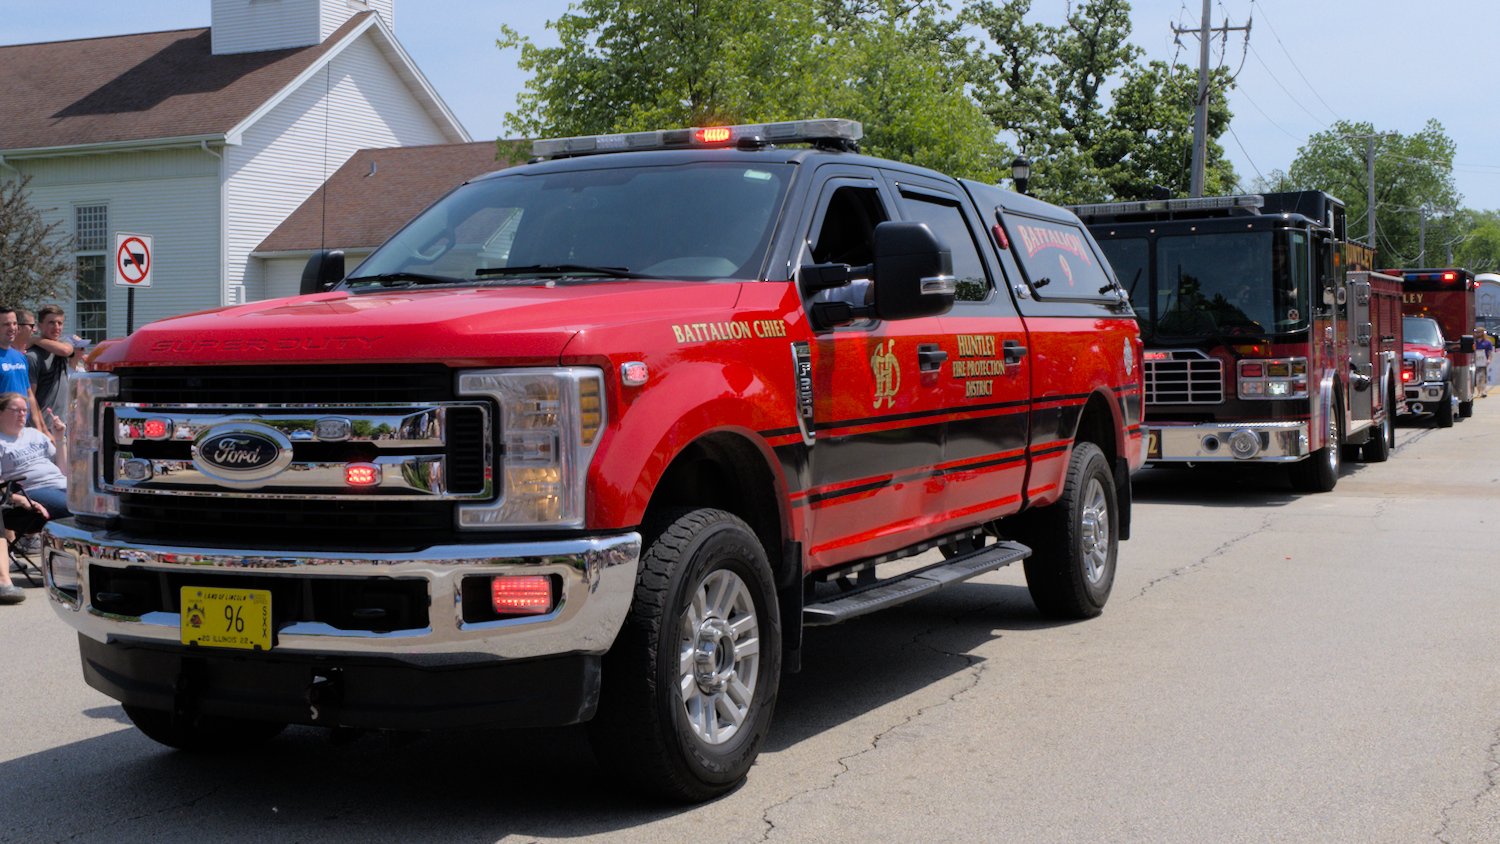 Huntley Fire Protection District Battalion Chief truck.